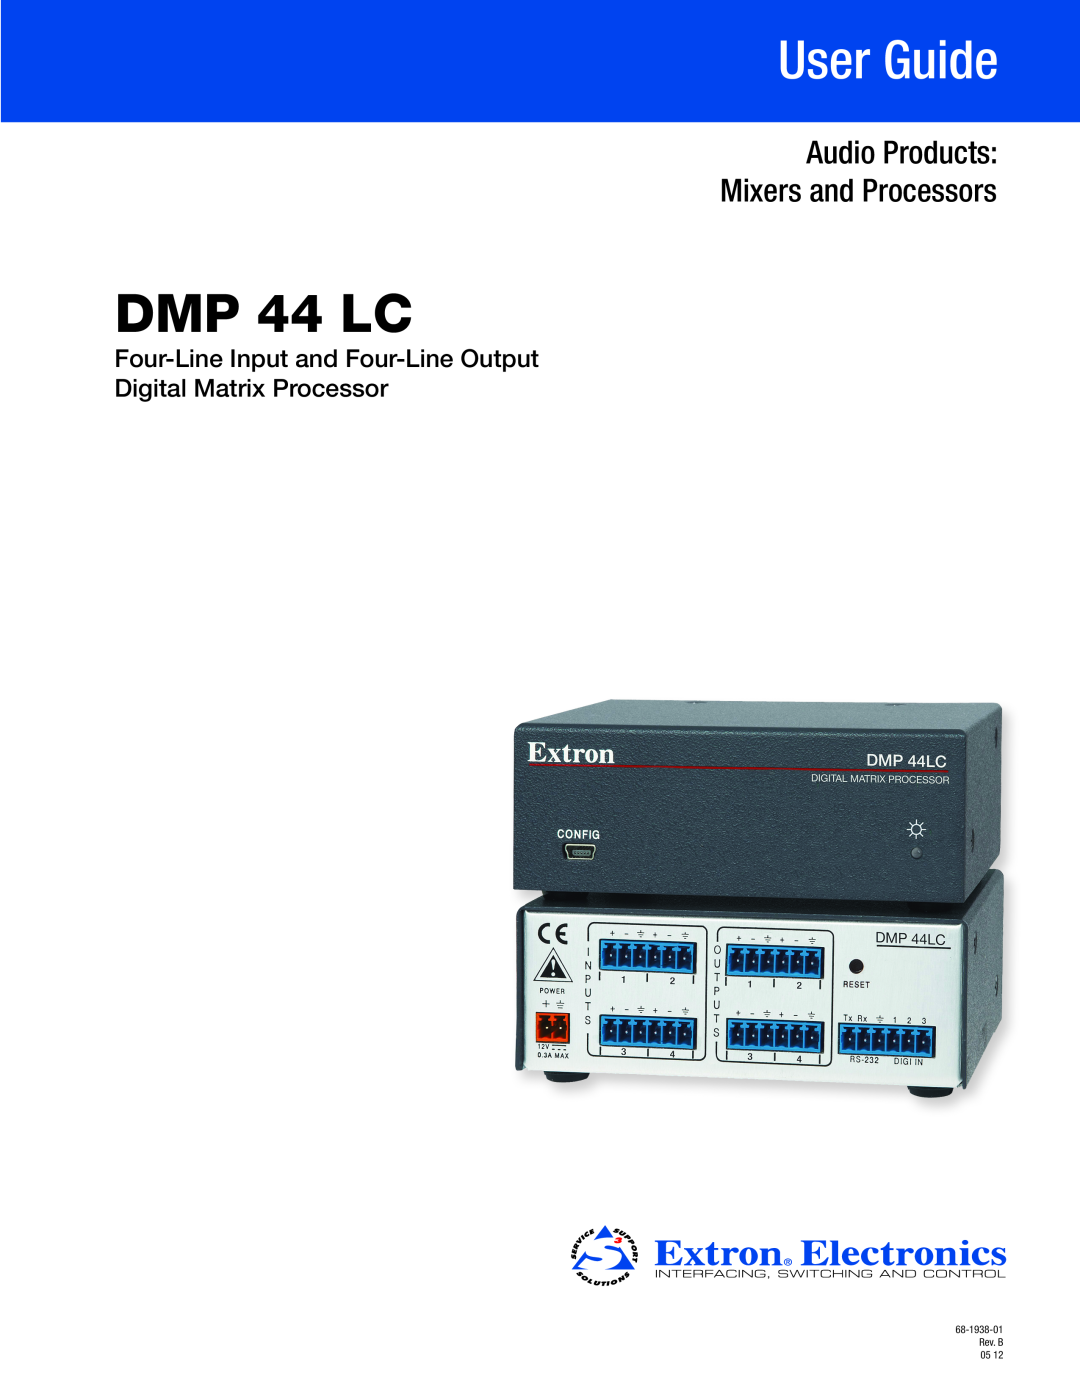 Extron electronic setup guide DMP 44 LC Setup Guide, Rear Panel Features and Connections, Installing the DMP 44 LC 